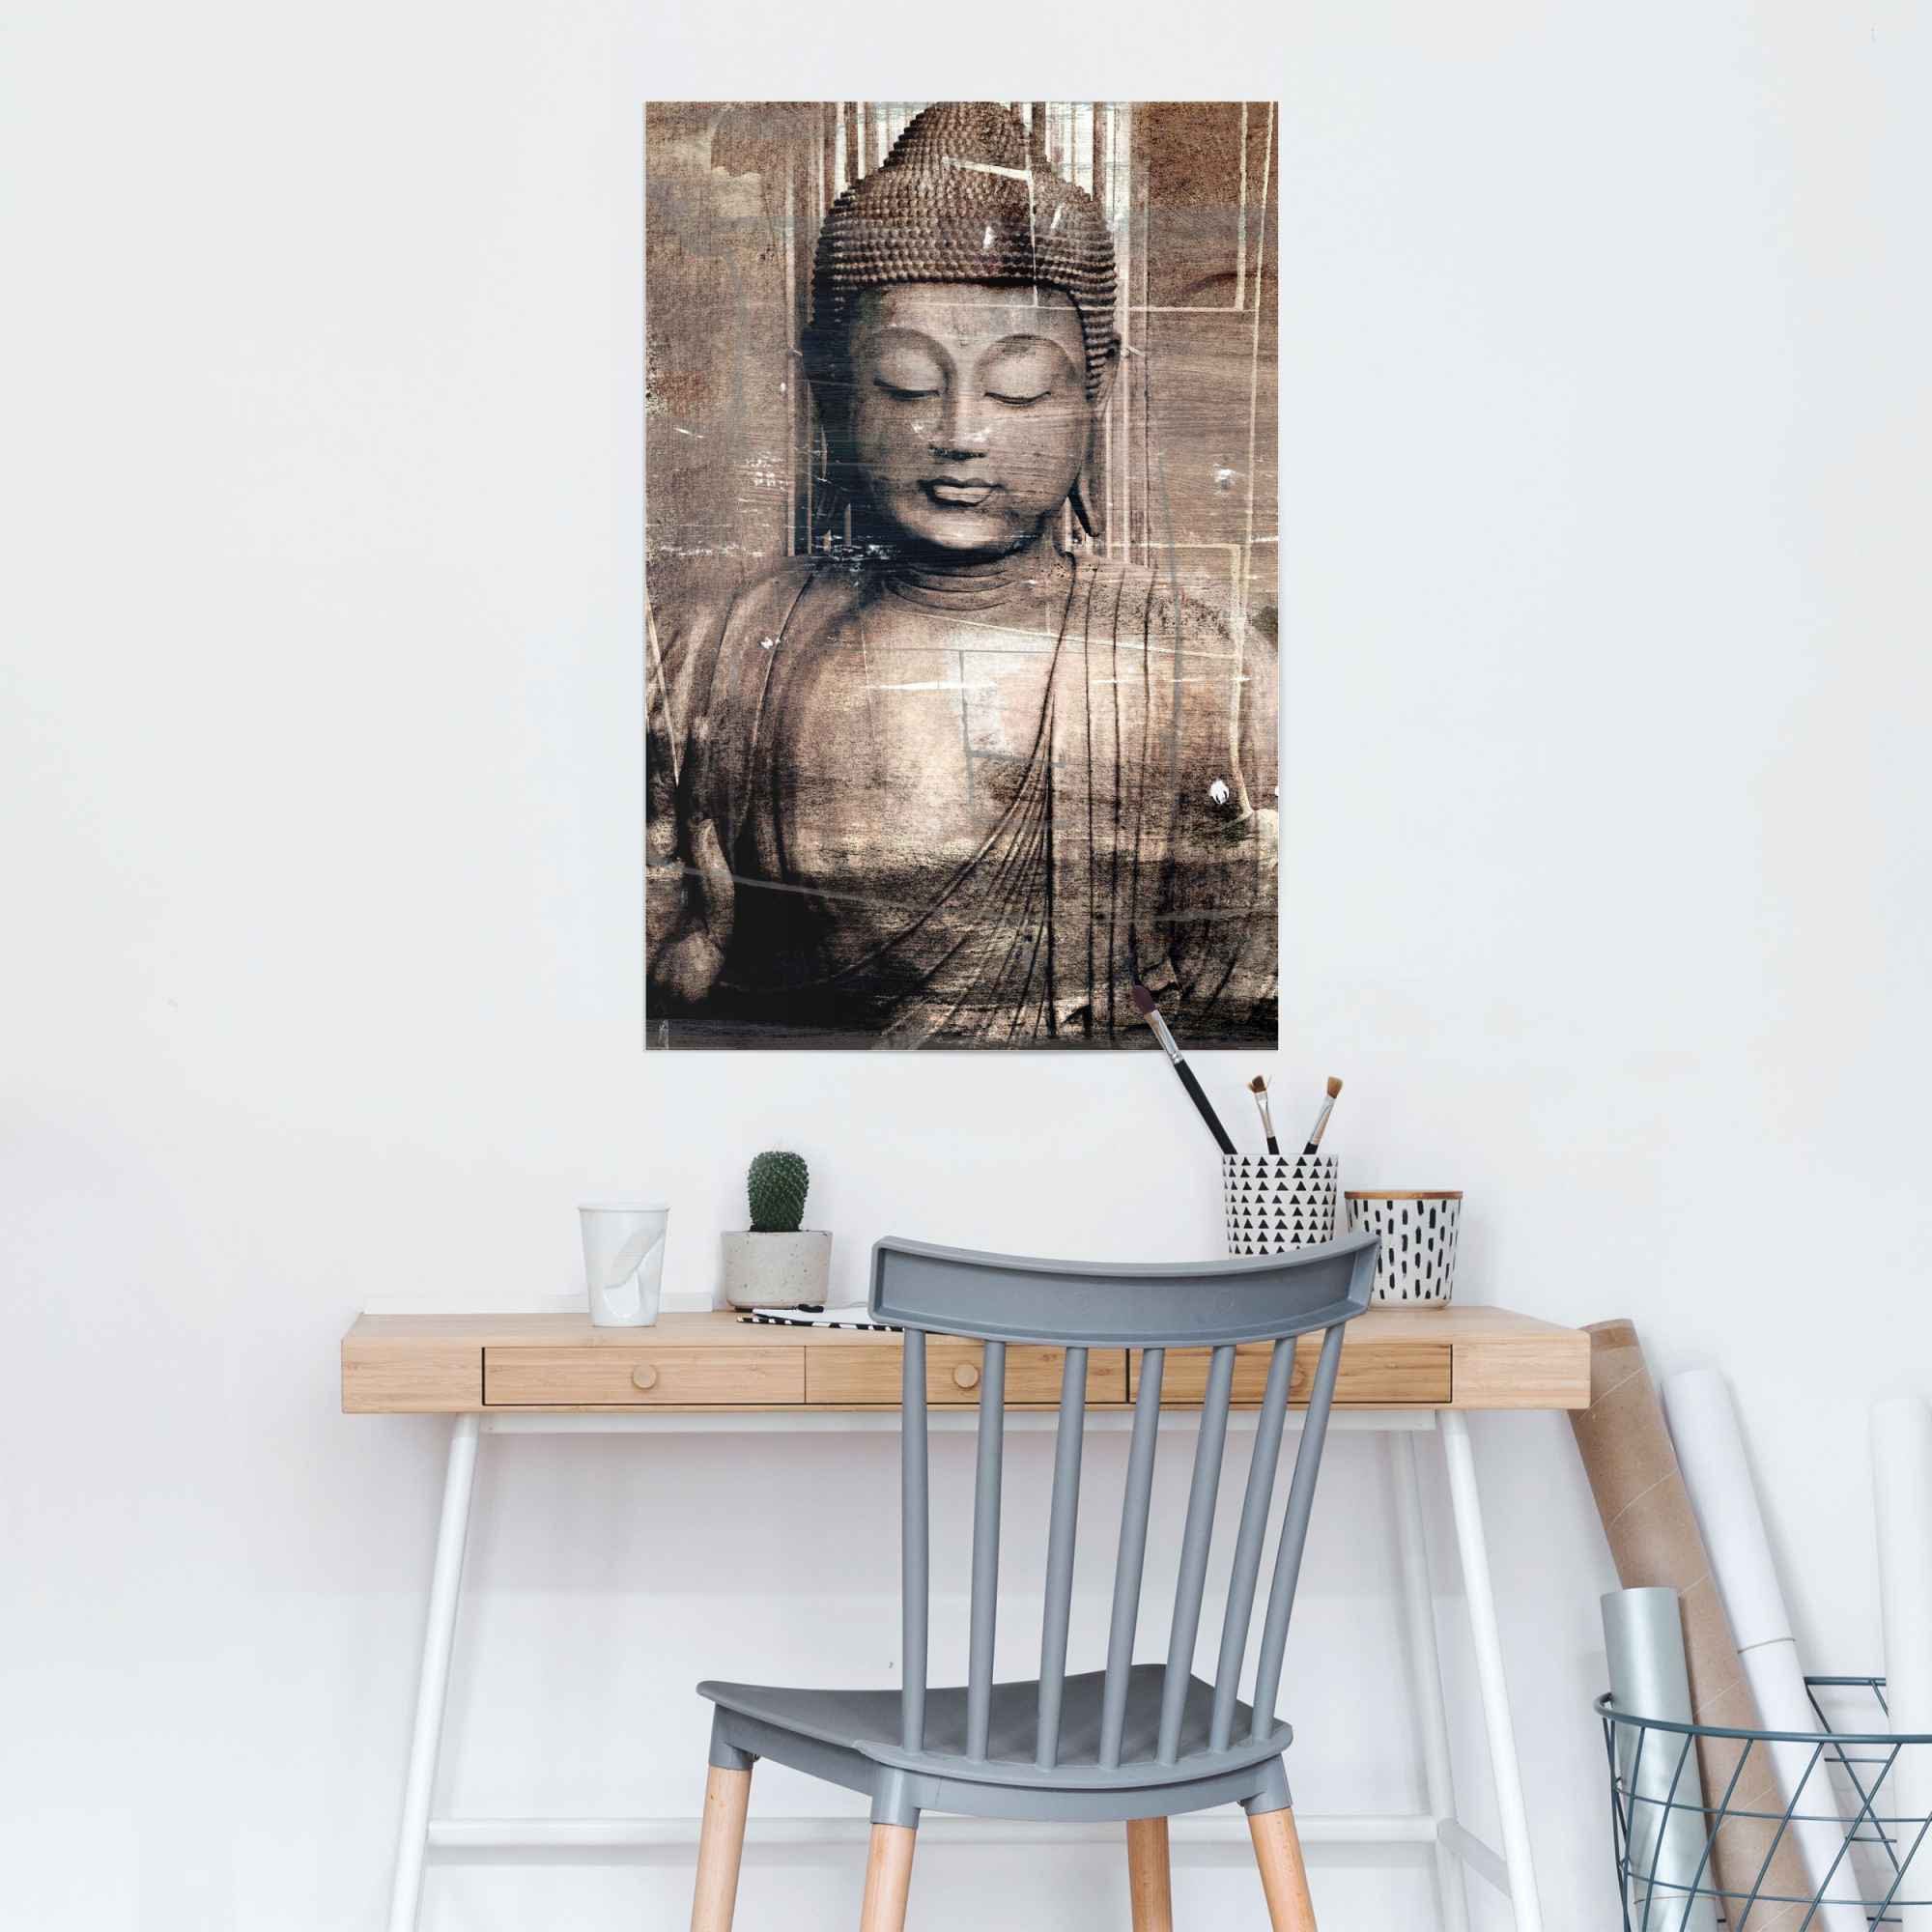 St) (1 Poster Buddha, Reinders!